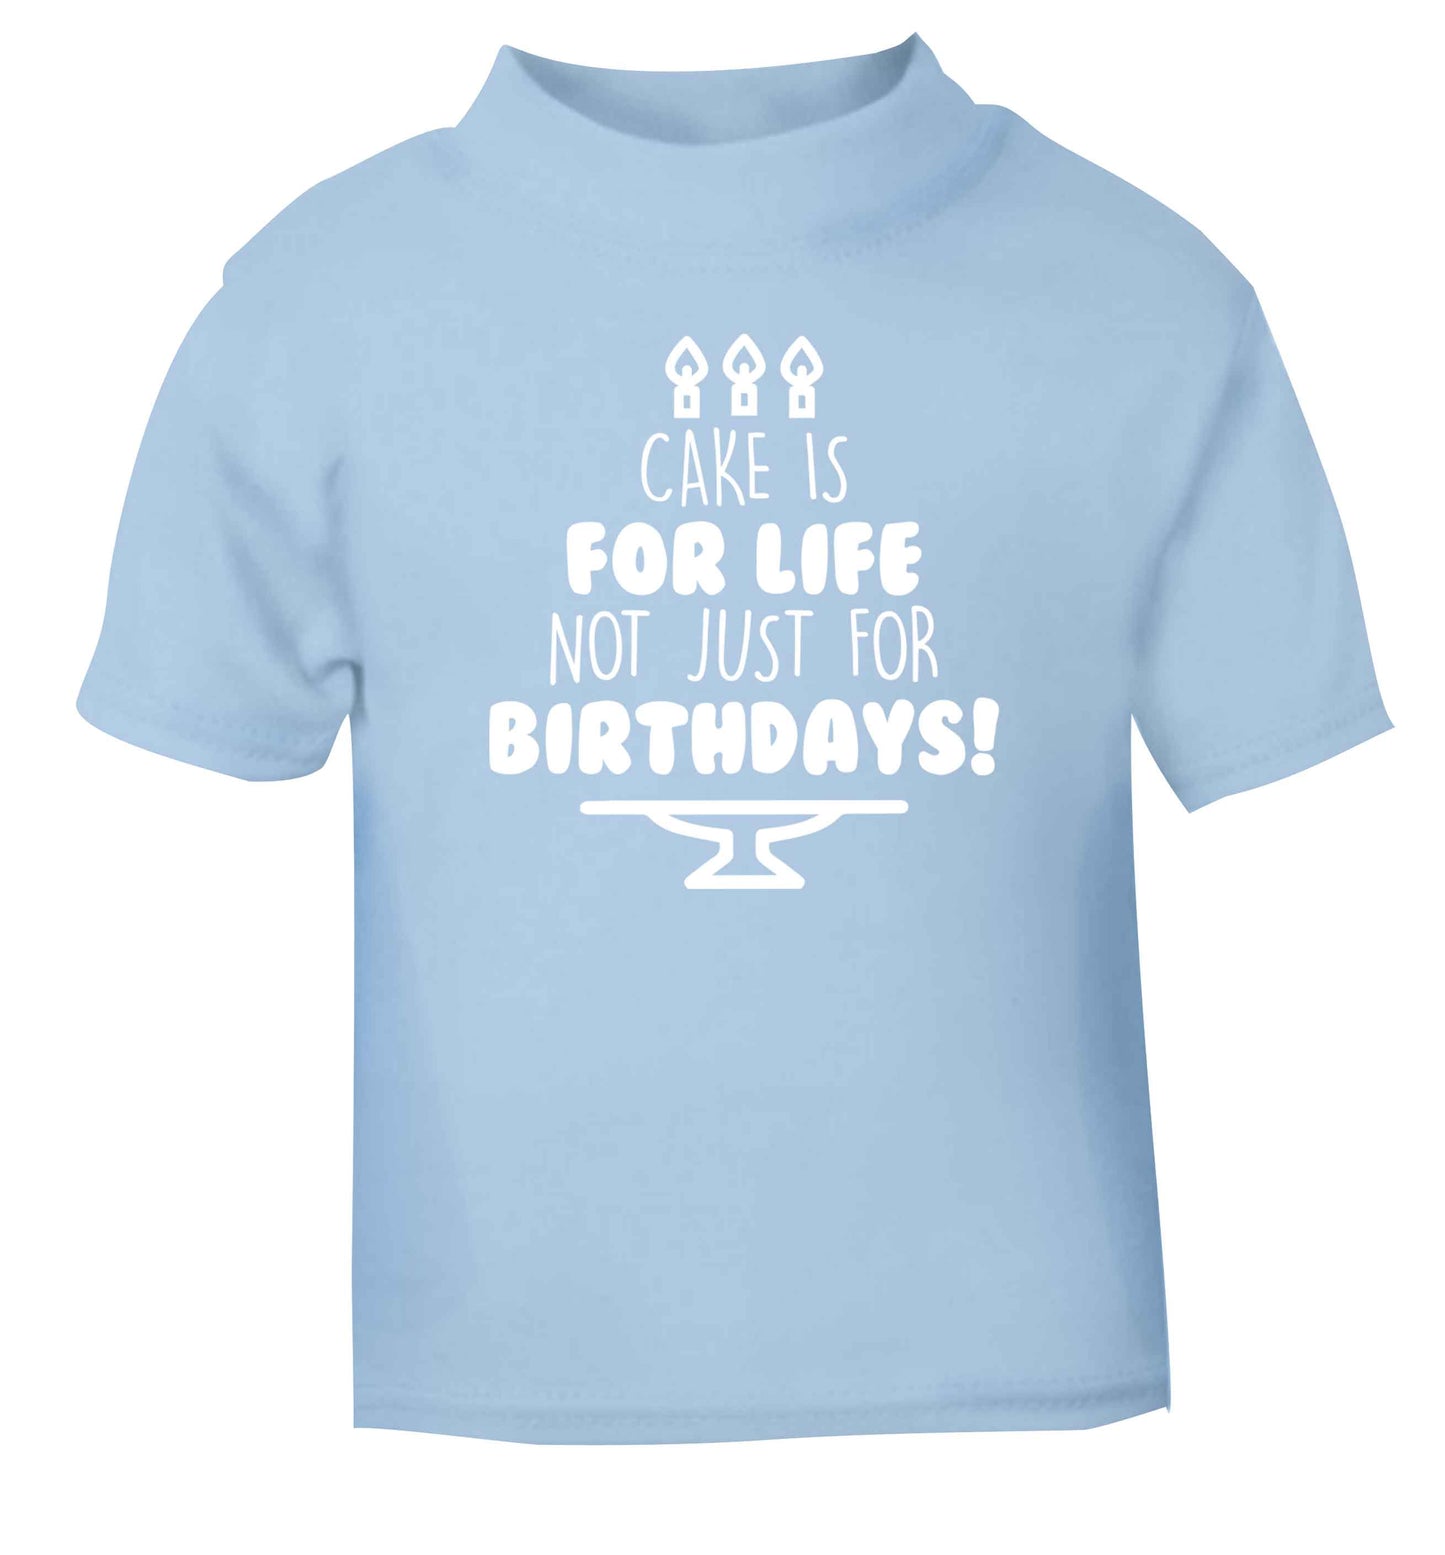 Cake is for life not just for birthdays light blue Baby Toddler Tshirt 2 Years